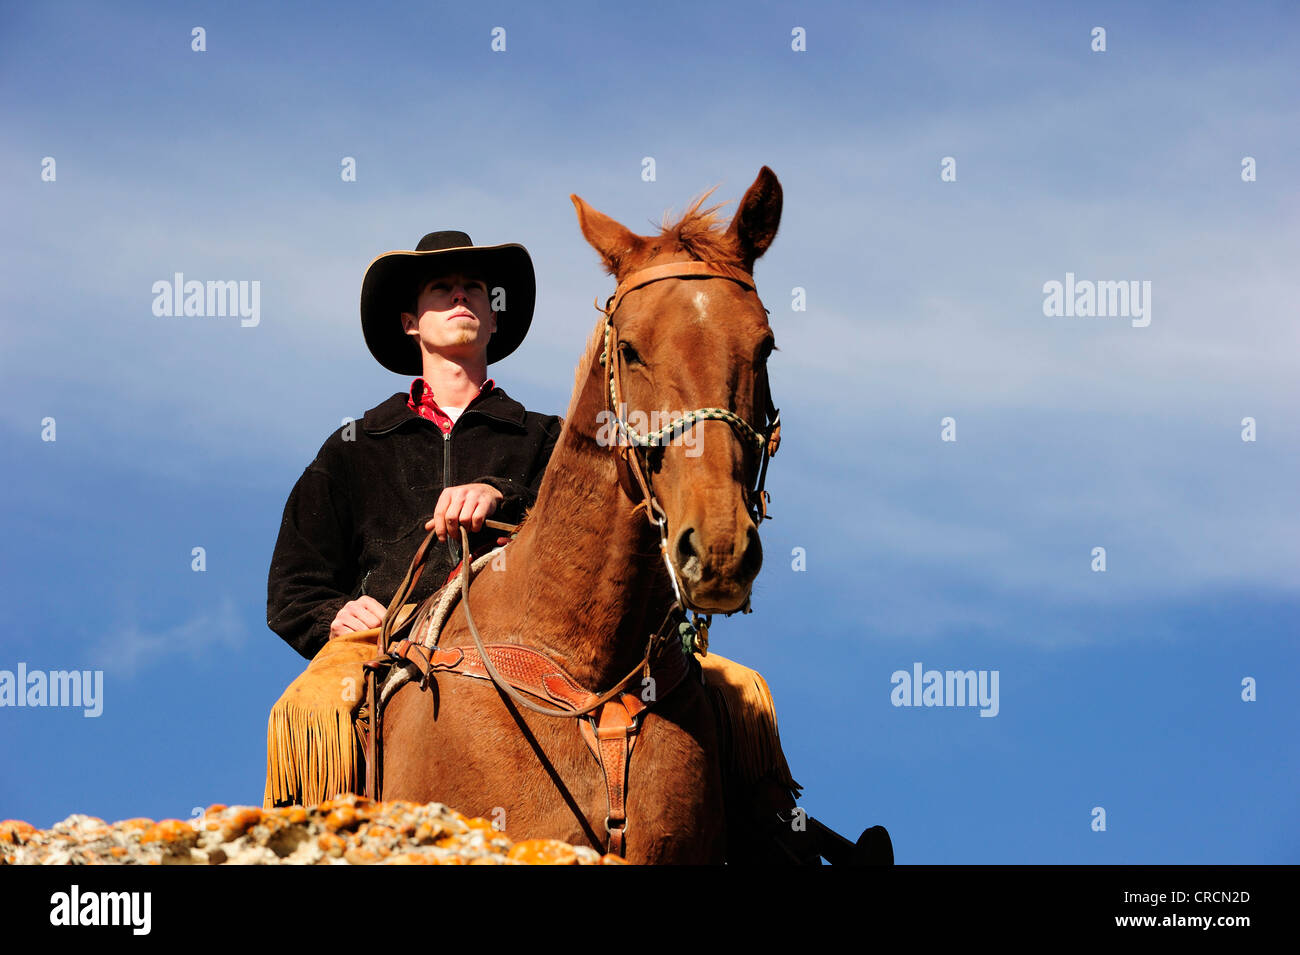 Cowboy on a horse looking into the distance, Saskatchewan, Canada, North America Stock Photo